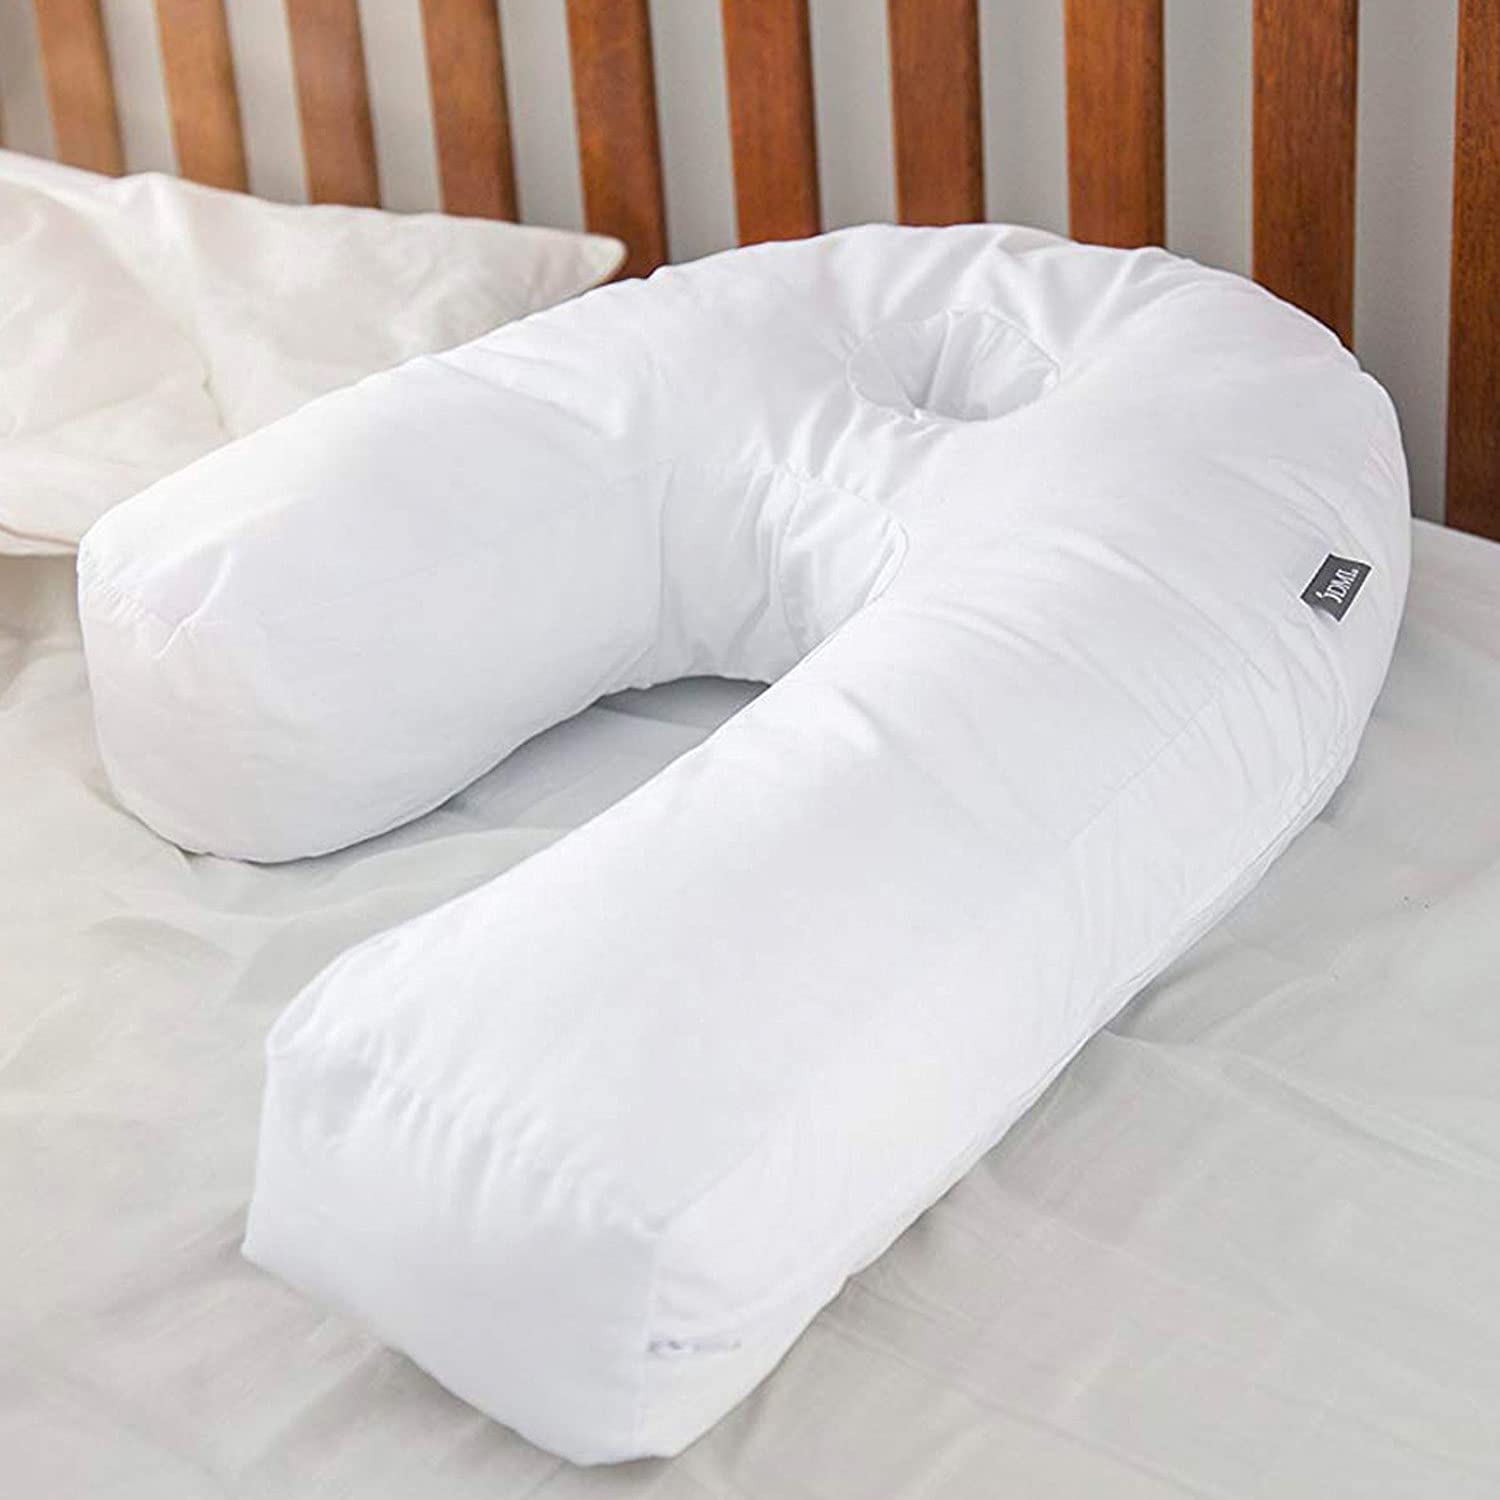 DMI Side Sleeper Pillow and Body Pillow, Pregnancy Pillow with Contoured Support for Neck, Back, Hip, Joint Pain and Sciatica Relief with Removable Washable Cover, Firm, Full Body Pillow